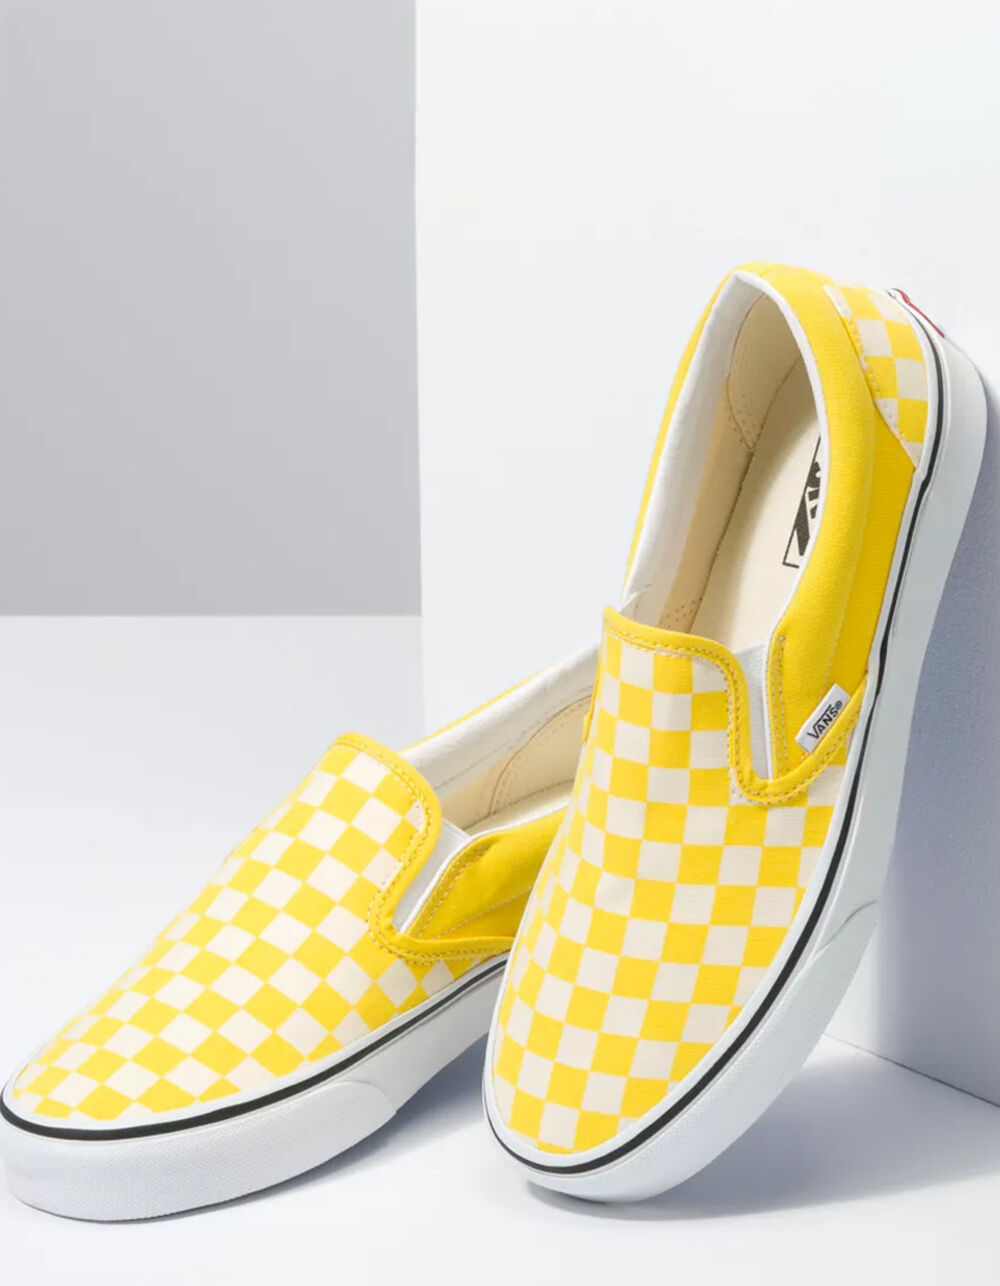 VANS Checkerboard Classic Slip-On Shoes - CYBER YELLOW/TRUE WHITE | Tillys